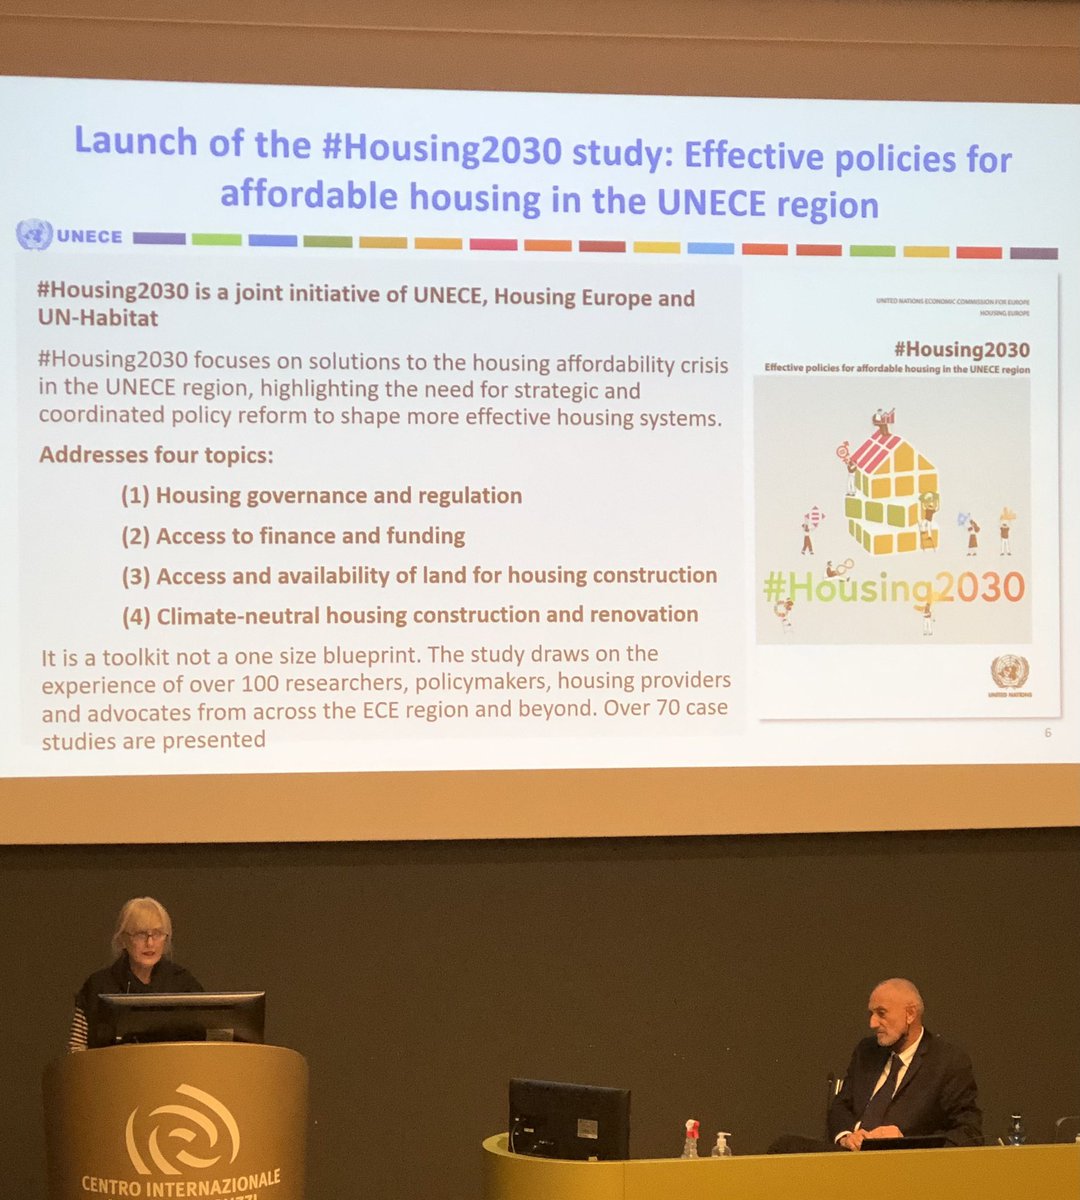 .@DorisAndoni presents #Housing2030 initiative at ACER event in Reggio Emilia highlighting the importance of innovating while also looking at what has worked in the past @HousingEurope @UNECEHLM @federcasaItalia